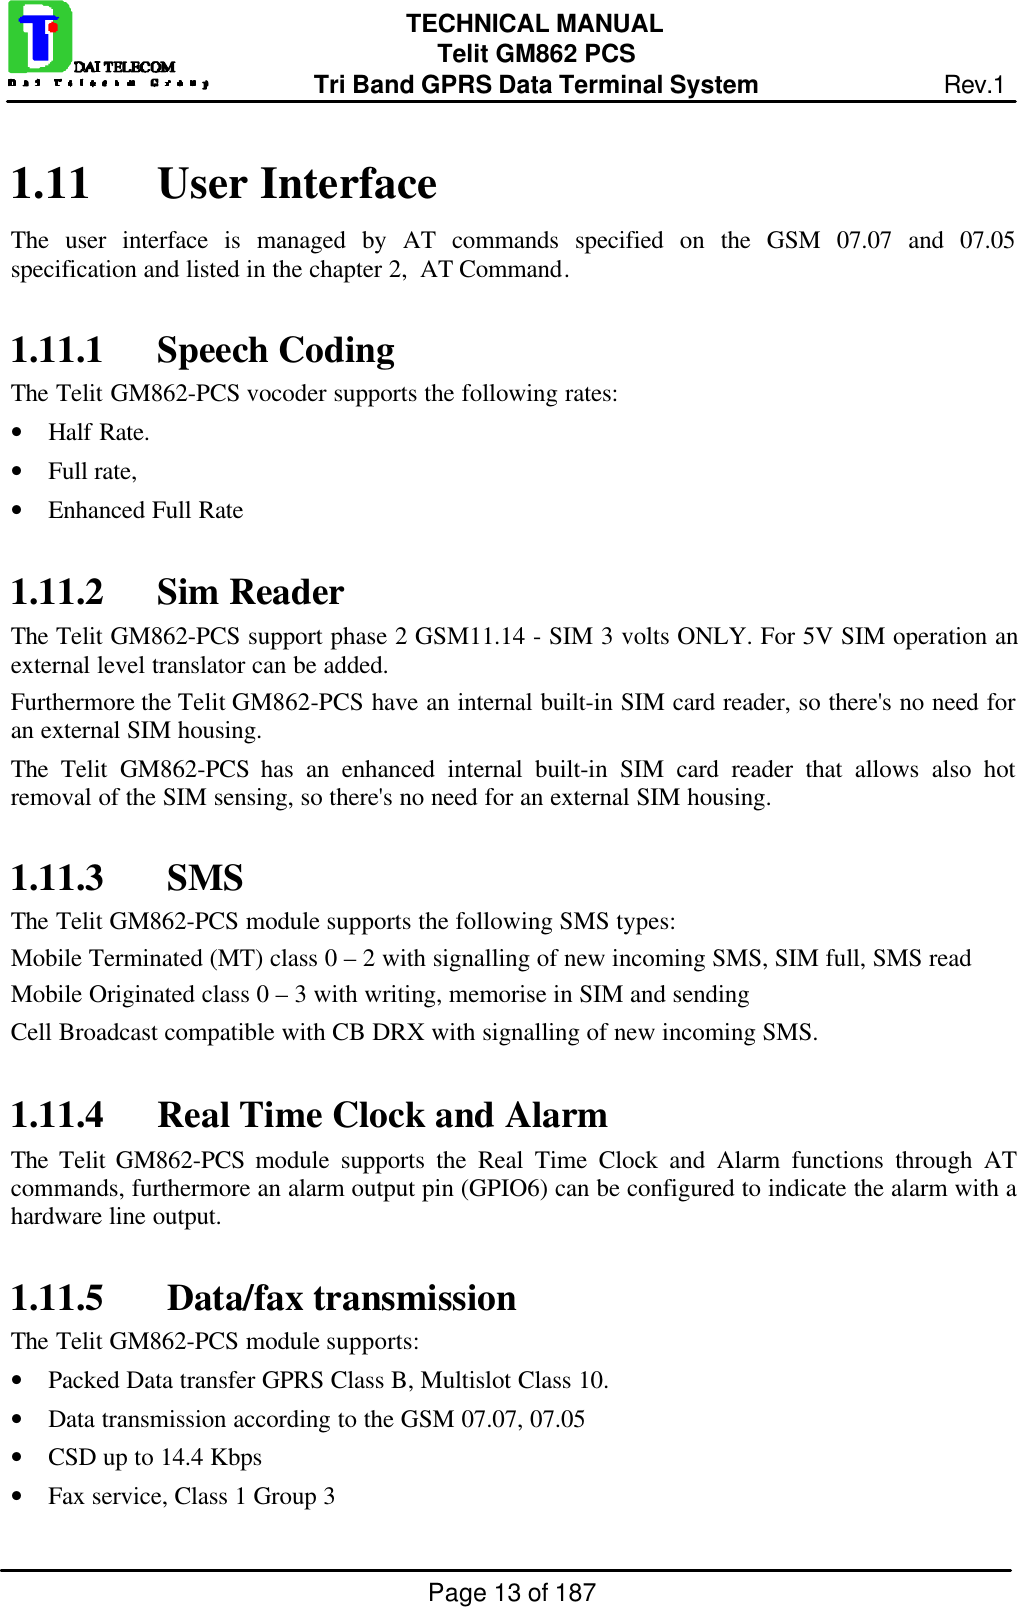 Page 13 of 187TECHNICAL MANUALTelit GM862 PCSTri Band GPRS Data Terminal System Rev.11.11 User InterfaceThe user interface is managed by AT commands specified on the GSM 07.07 and 07.05specification and listed in the chapter 2,  AT Command.1.11.1 Speech CodingThe Telit GM862-PCS vocoder supports the following rates:• Half Rate.• Full rate,• Enhanced Full Rate1.11.2 Sim ReaderThe Telit GM862-PCS support phase 2 GSM11.14 - SIM 3 volts ONLY. For 5V SIM operation anexternal level translator can be added.Furthermore the Telit GM862-PCS have an internal built-in SIM card reader, so there&apos;s no need foran external SIM housing.The  Telit GM862-PCS has an enhanced internal built-in SIM card reader that allows also hotremoval of the SIM sensing, so there&apos;s no need for an external SIM housing.1.11.3  SMSThe Telit GM862-PCS module supports the following SMS types:Mobile Terminated (MT) class 0 – 2 with signalling of new incoming SMS, SIM full, SMS readMobile Originated class 0 – 3 with writing, memorise in SIM and sendingCell Broadcast compatible with CB DRX with signalling of new incoming SMS.1.11.4 Real Time Clock and AlarmThe  Telit GM862-PCS module supports the Real Time Clock and Alarm functions through ATcommands, furthermore an alarm output pin (GPIO6) can be configured to indicate the alarm with ahardware line output.1.11.5  Data/fax transmissionThe Telit GM862-PCS module supports:• Packed Data transfer GPRS Class B, Multislot Class 10.• Data transmission according to the GSM 07.07, 07.05• CSD up to 14.4 Kbps• Fax service, Class 1 Group 3